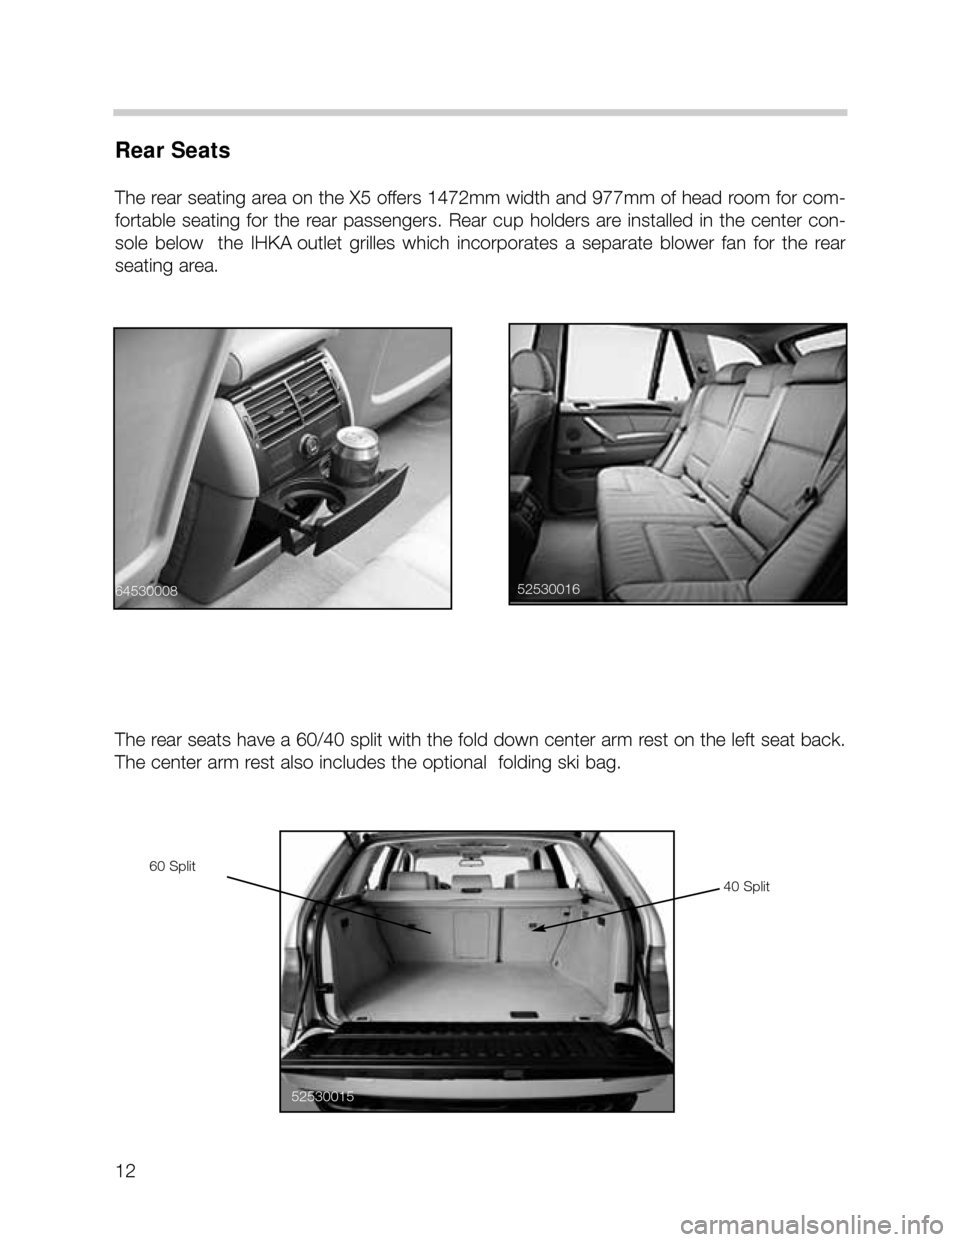 BMW X5 2002 E53 User Guide 12
Rear Seats
The rear seating area on the X5 offers 1472mm width and 977mm of head room for com-
fortable  seating  for  the  rear  passengers.  Rear  cup  holders  are  installed  in  the  center  c